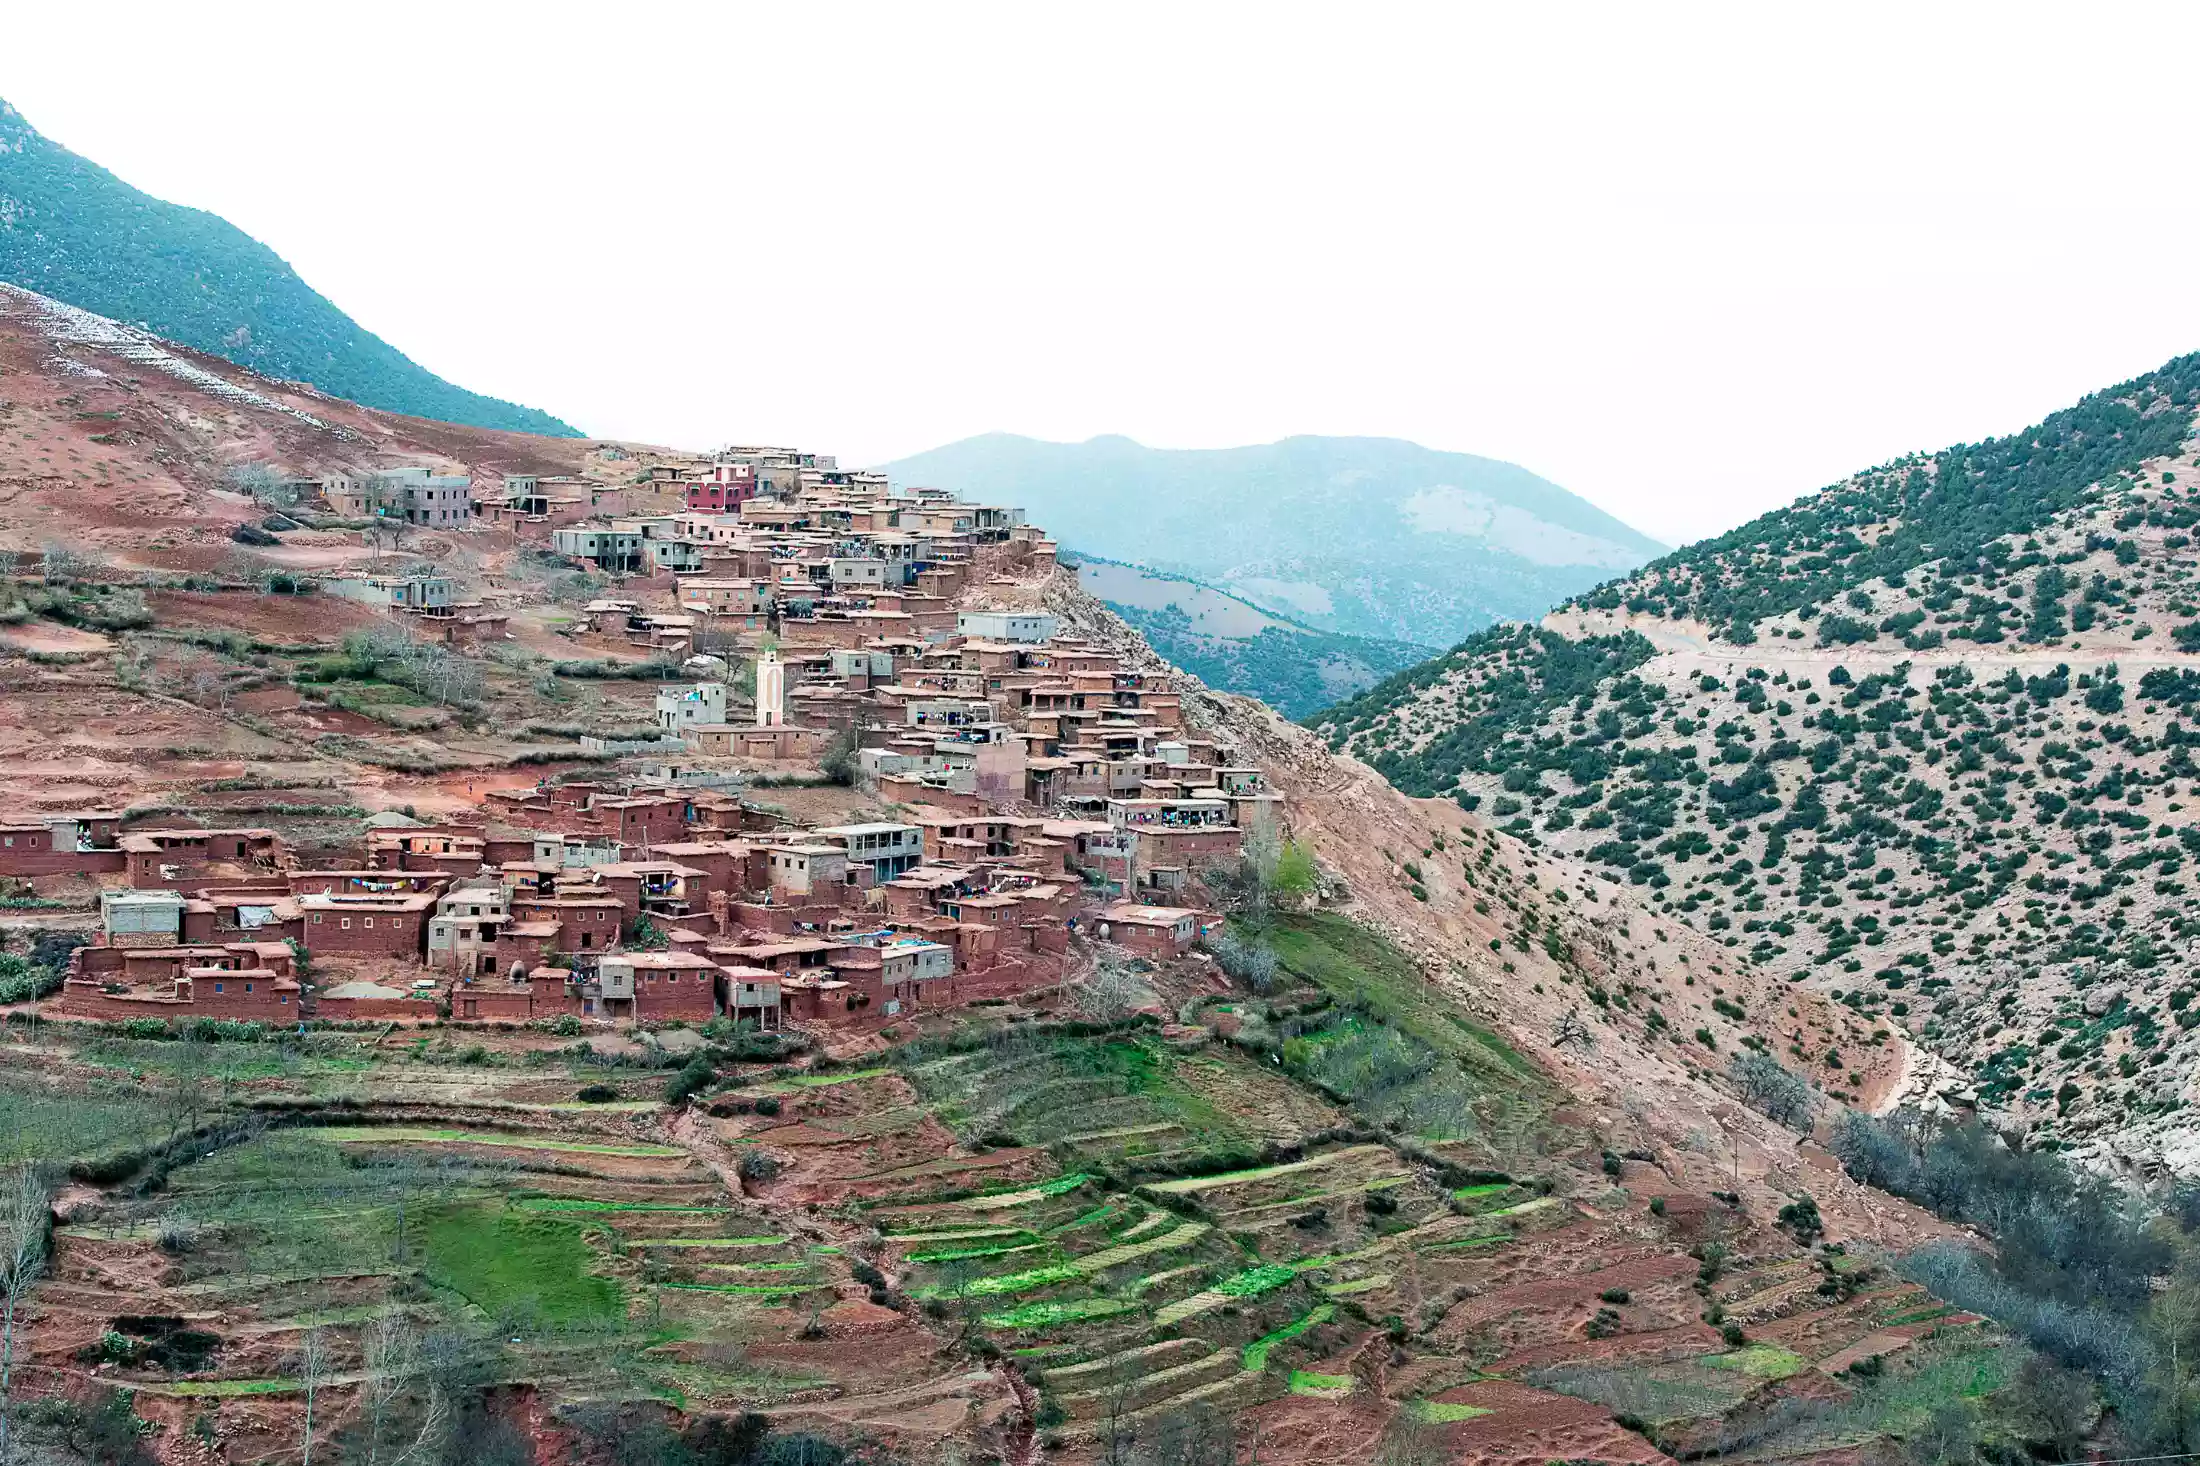 Berber village clings to the hillside of the High Atlas Mountains, Morocco